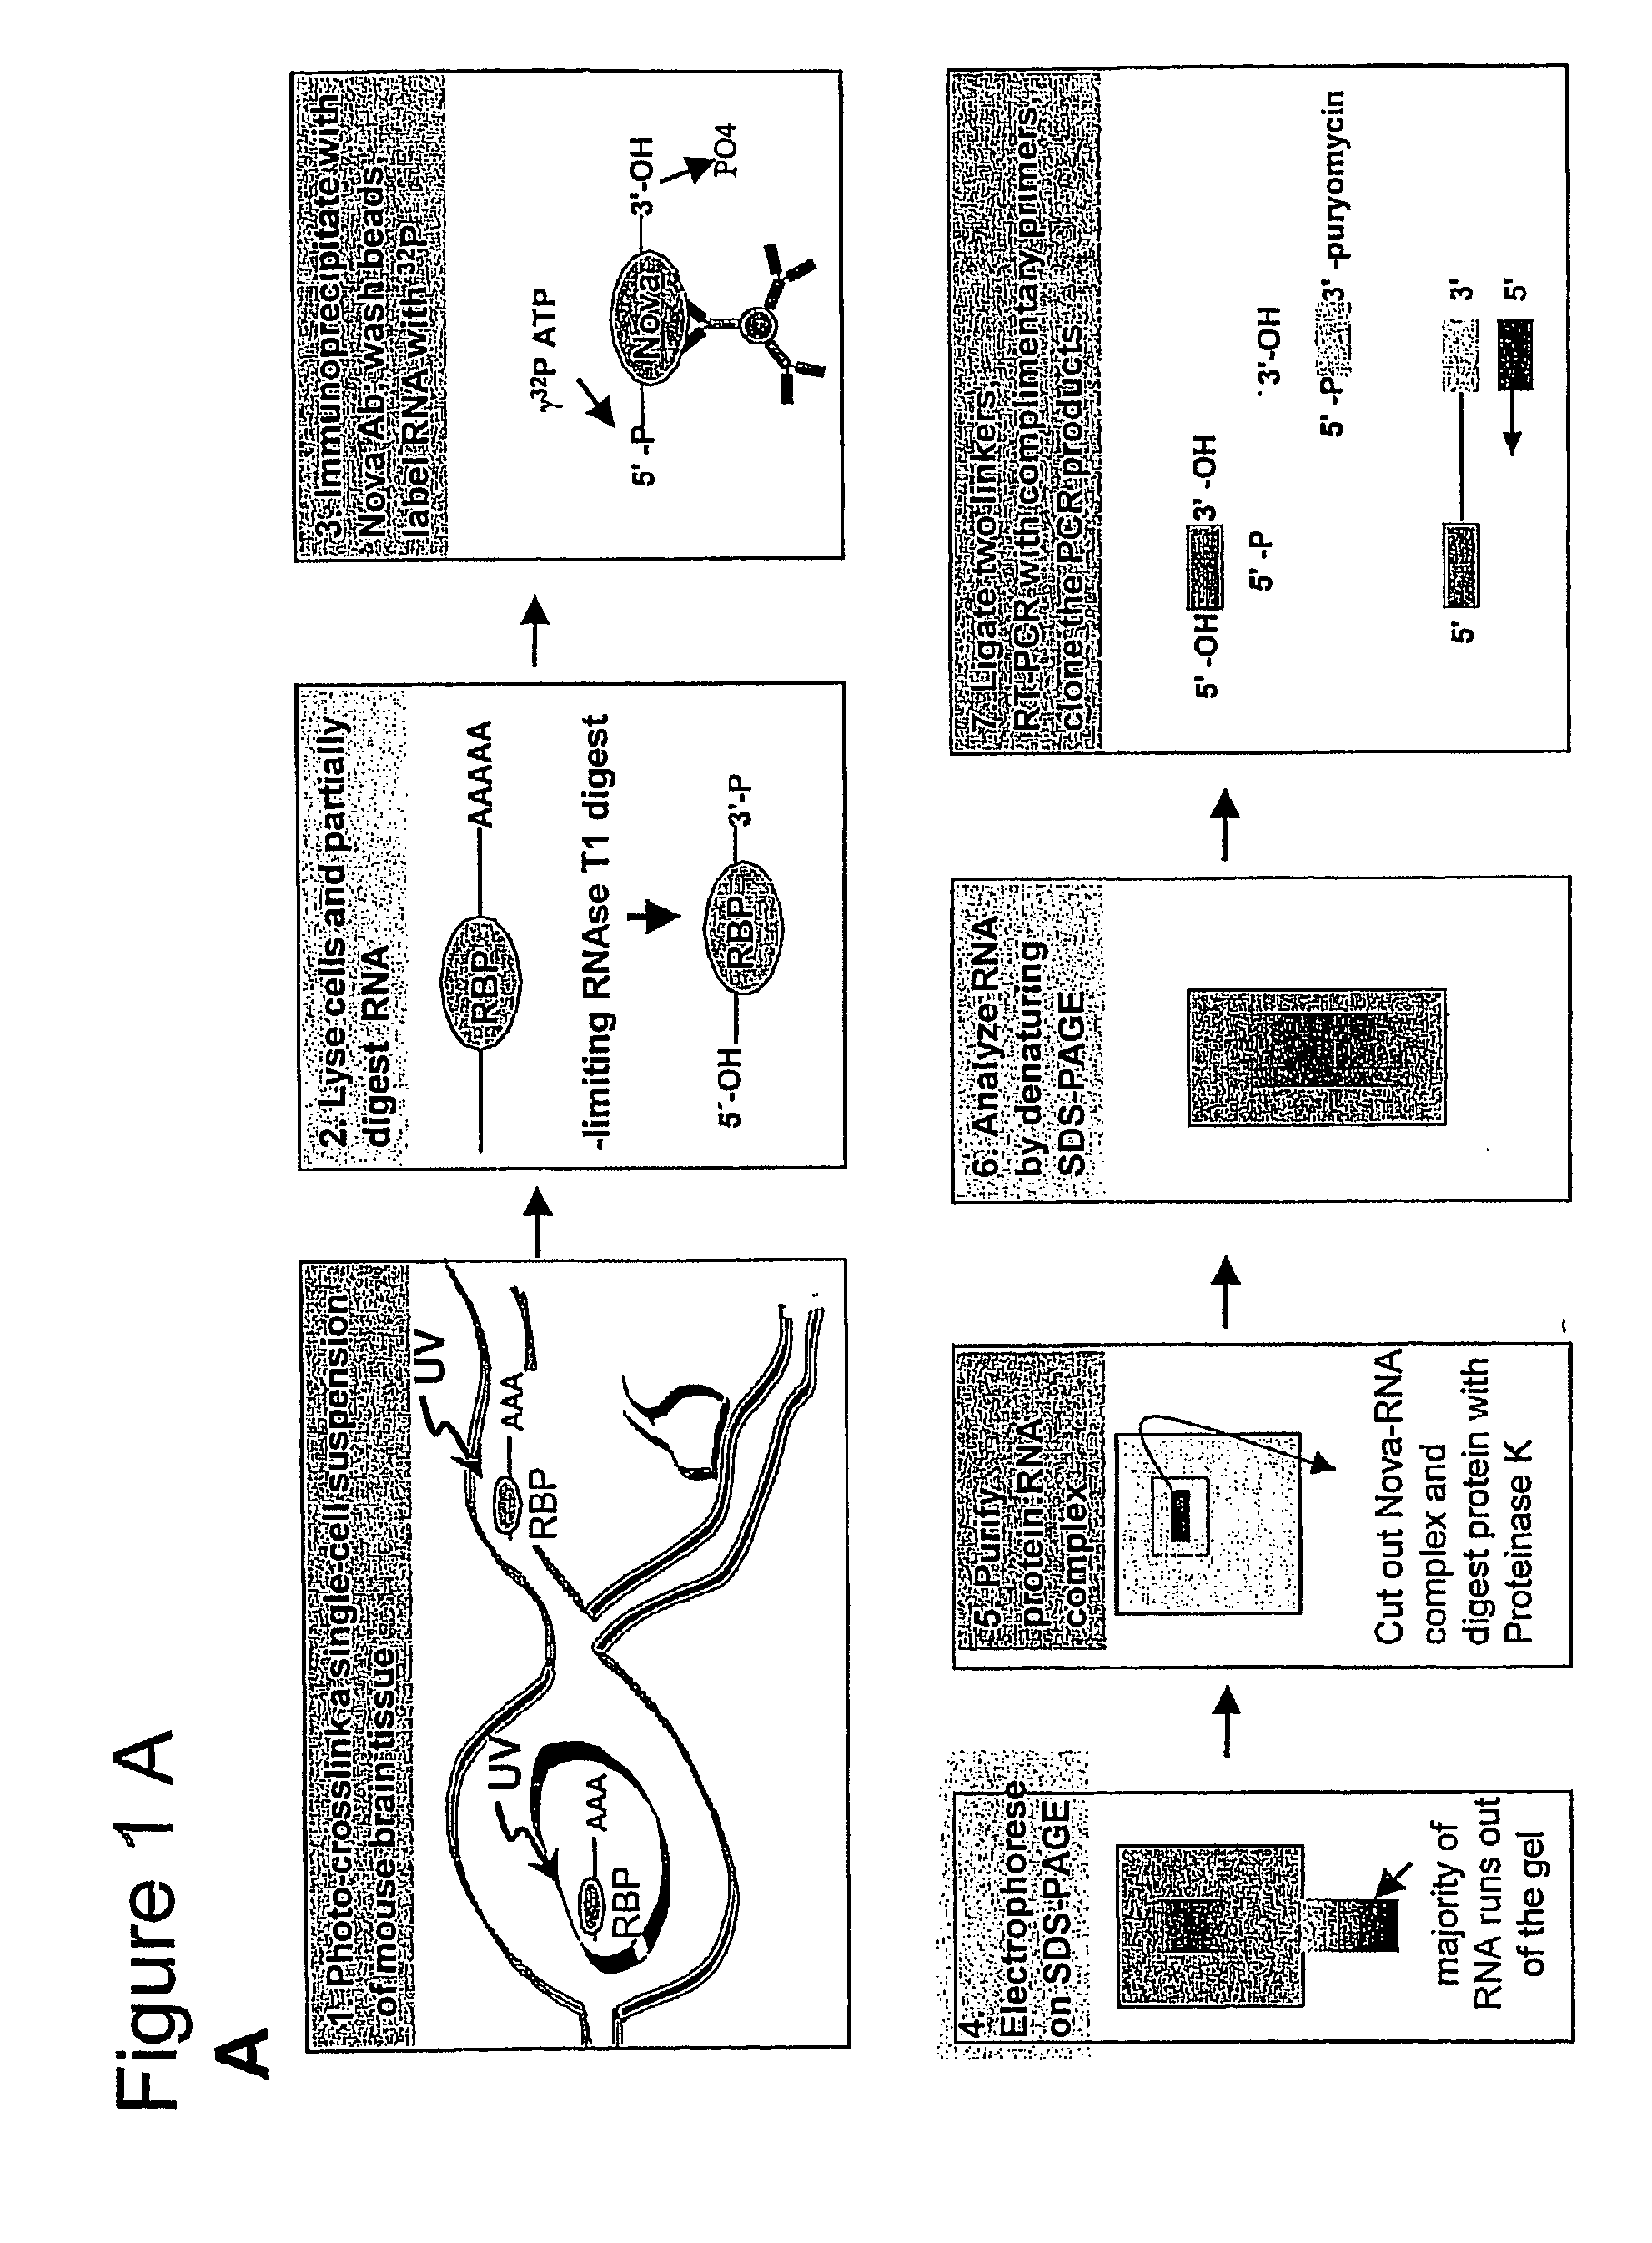 Method of Purifying RNA Binding Protein-RNA Complexes